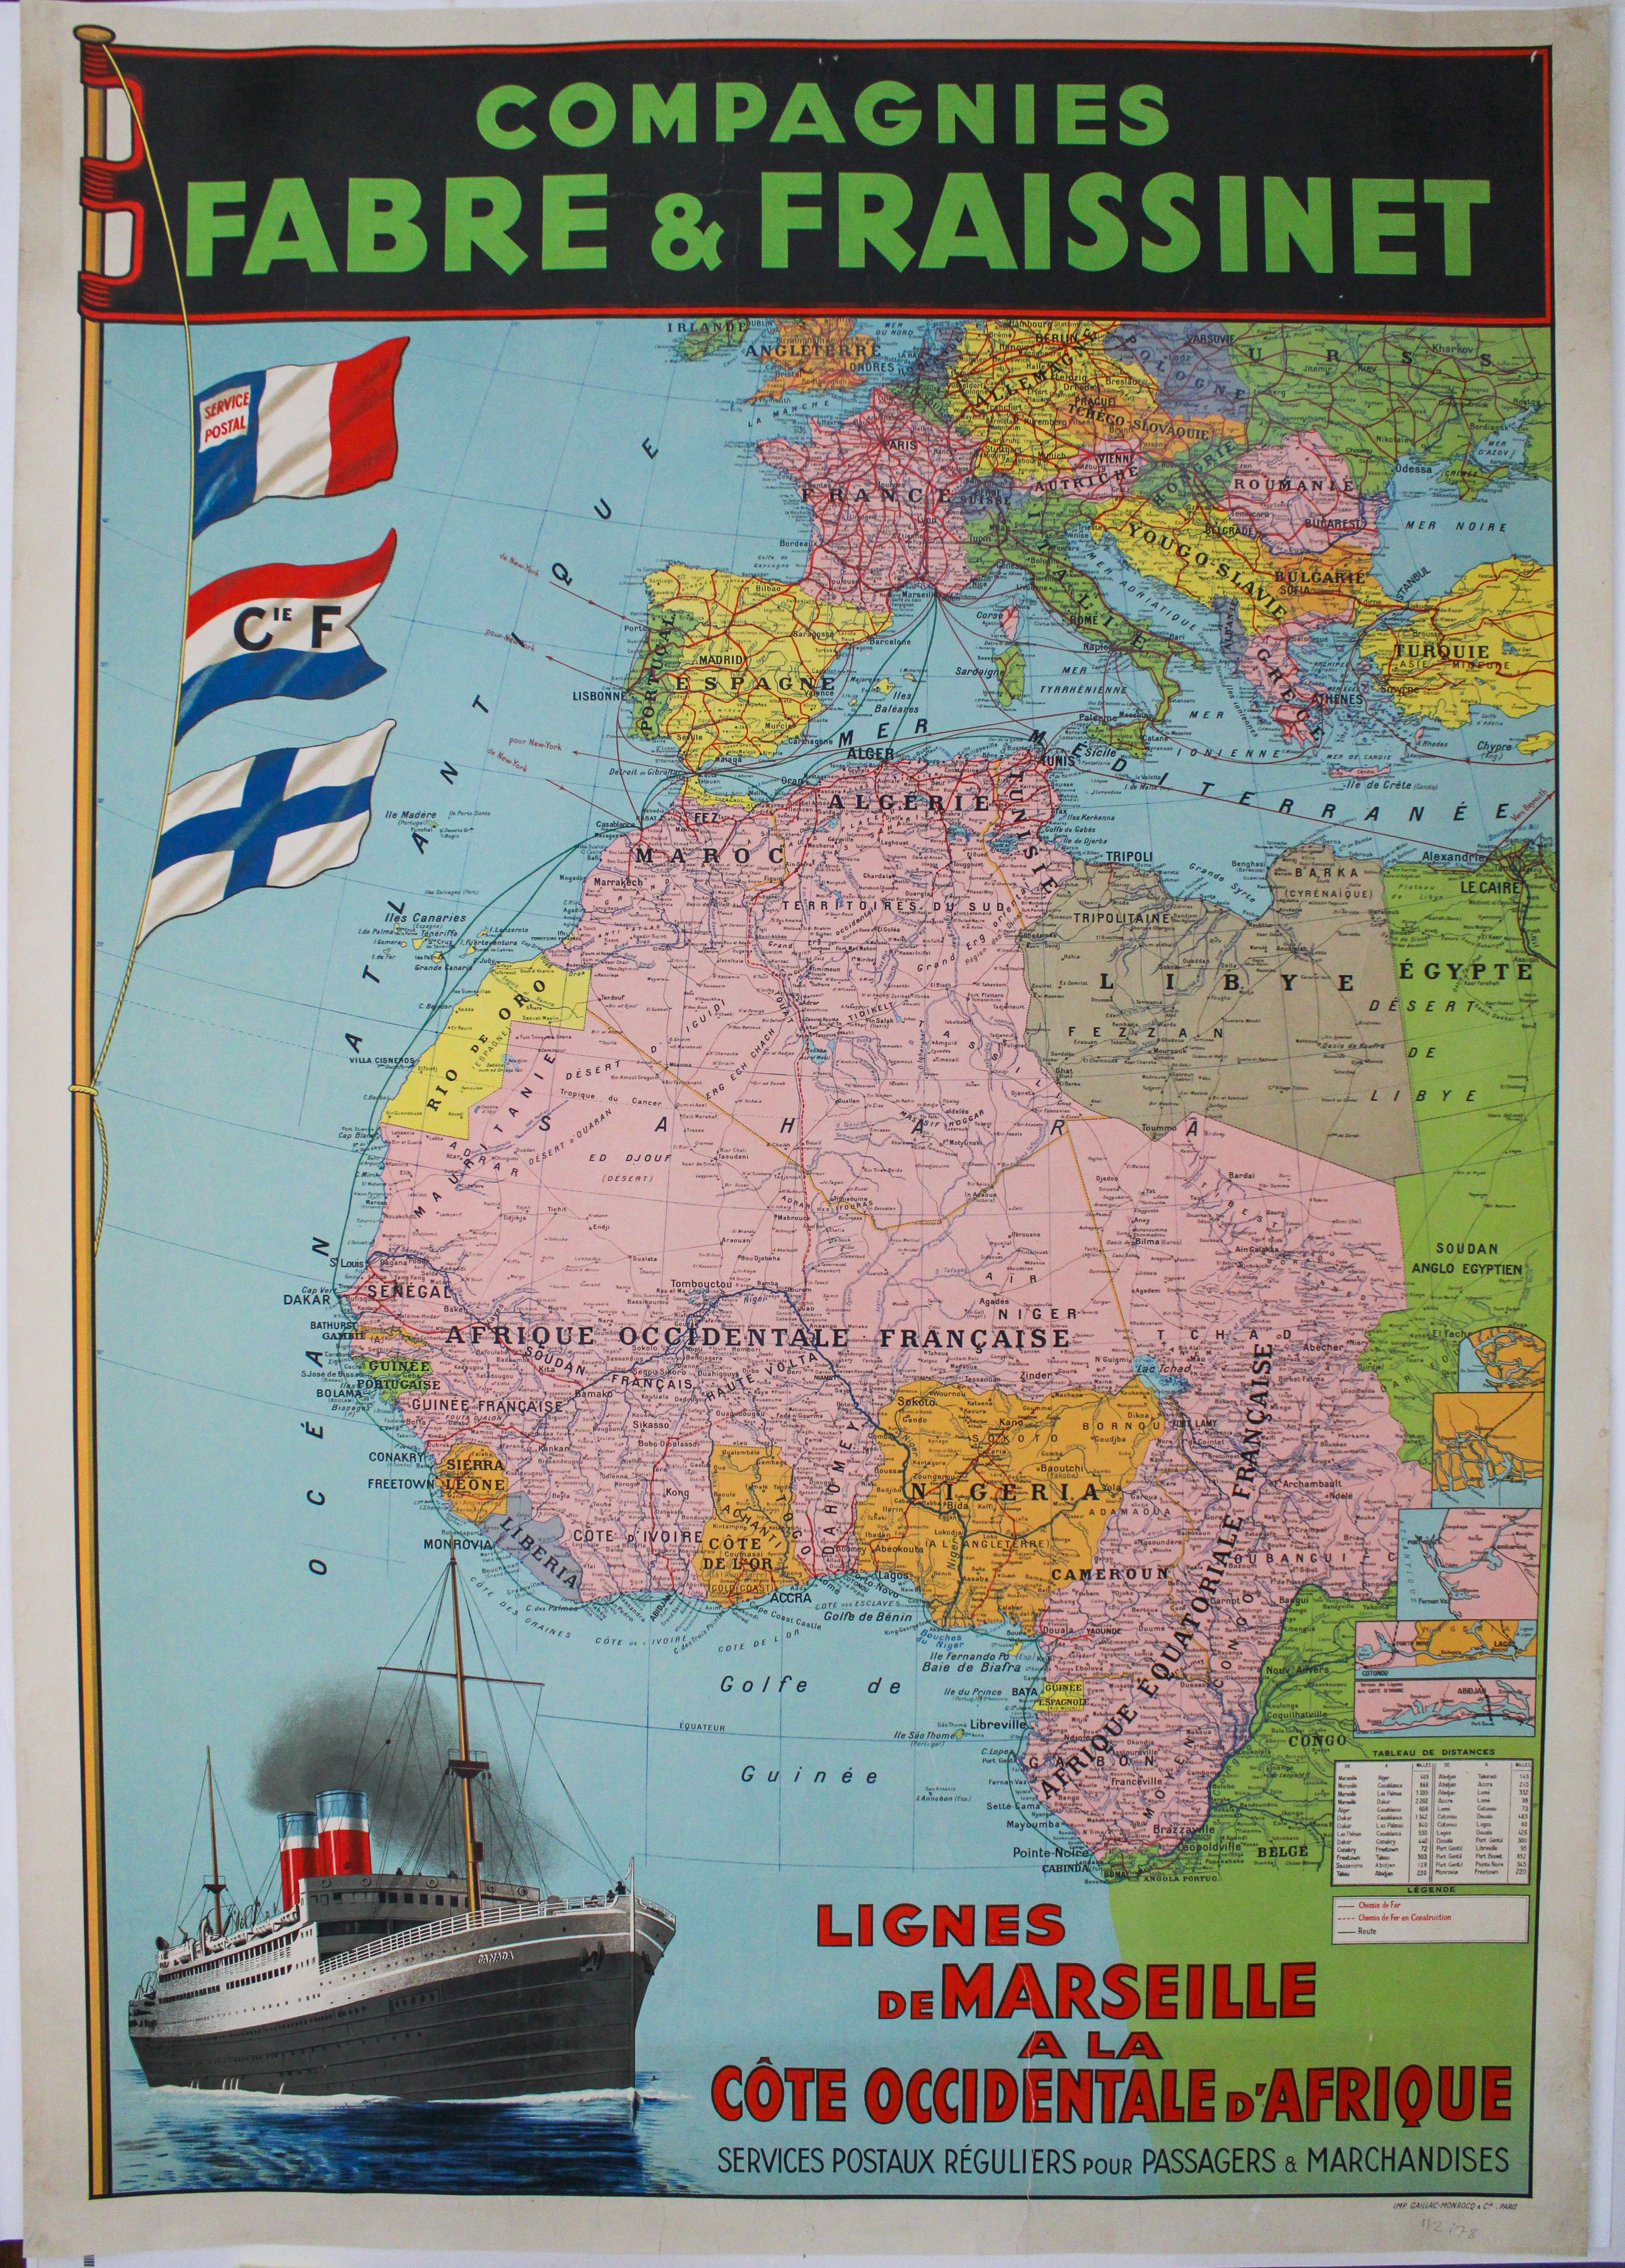 Compagnies Fabre et Frassinet West Africa Route Map